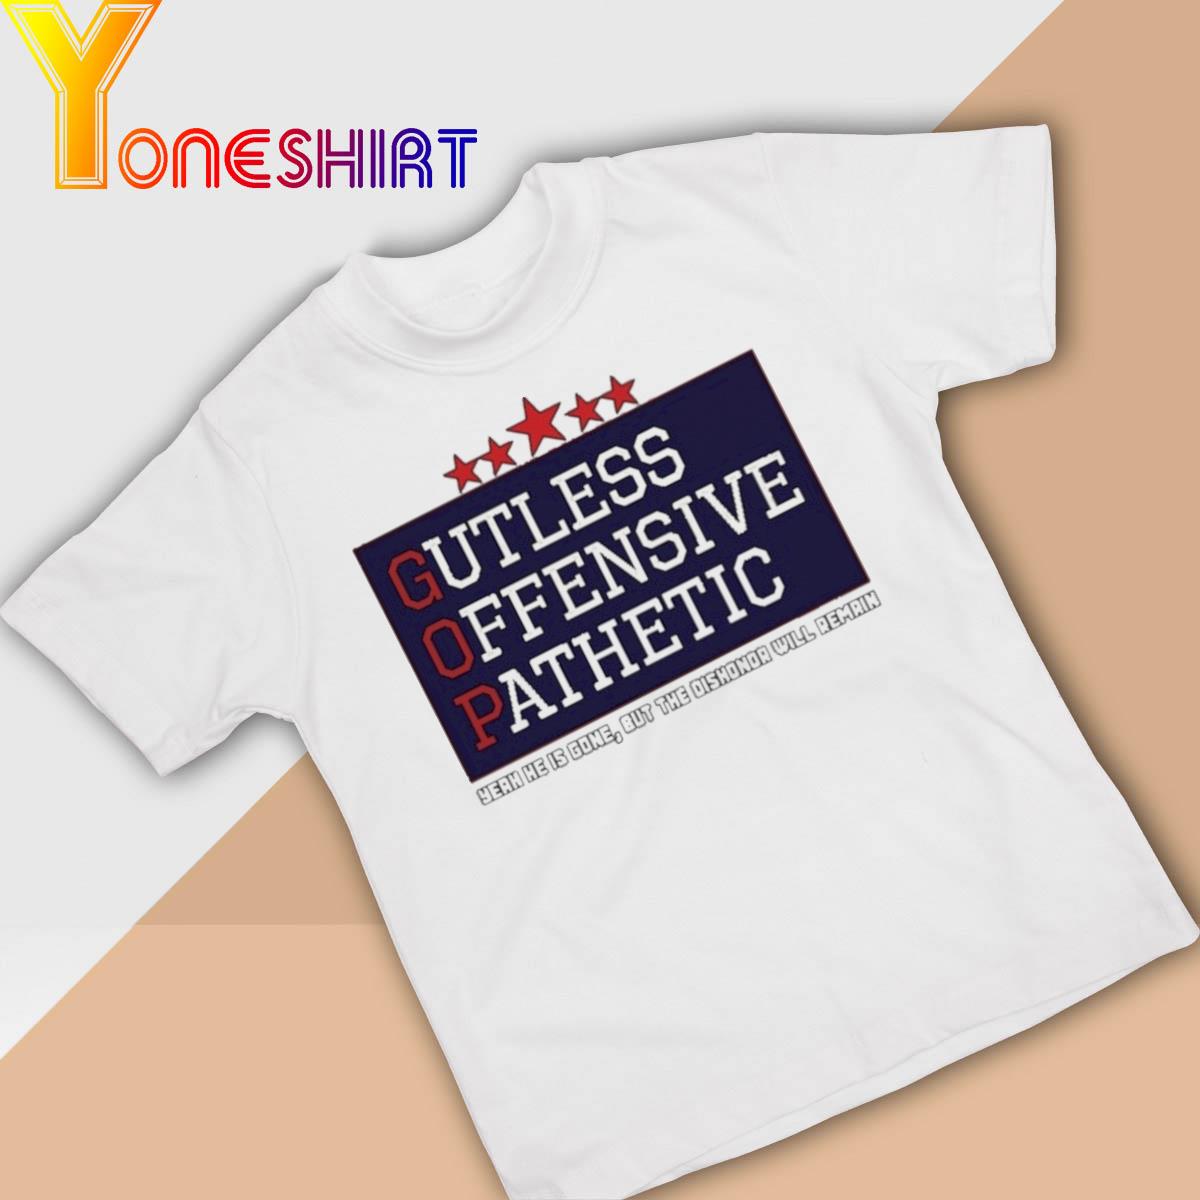 Gutless Offensive Panthetic Yeah he is Gone shirt